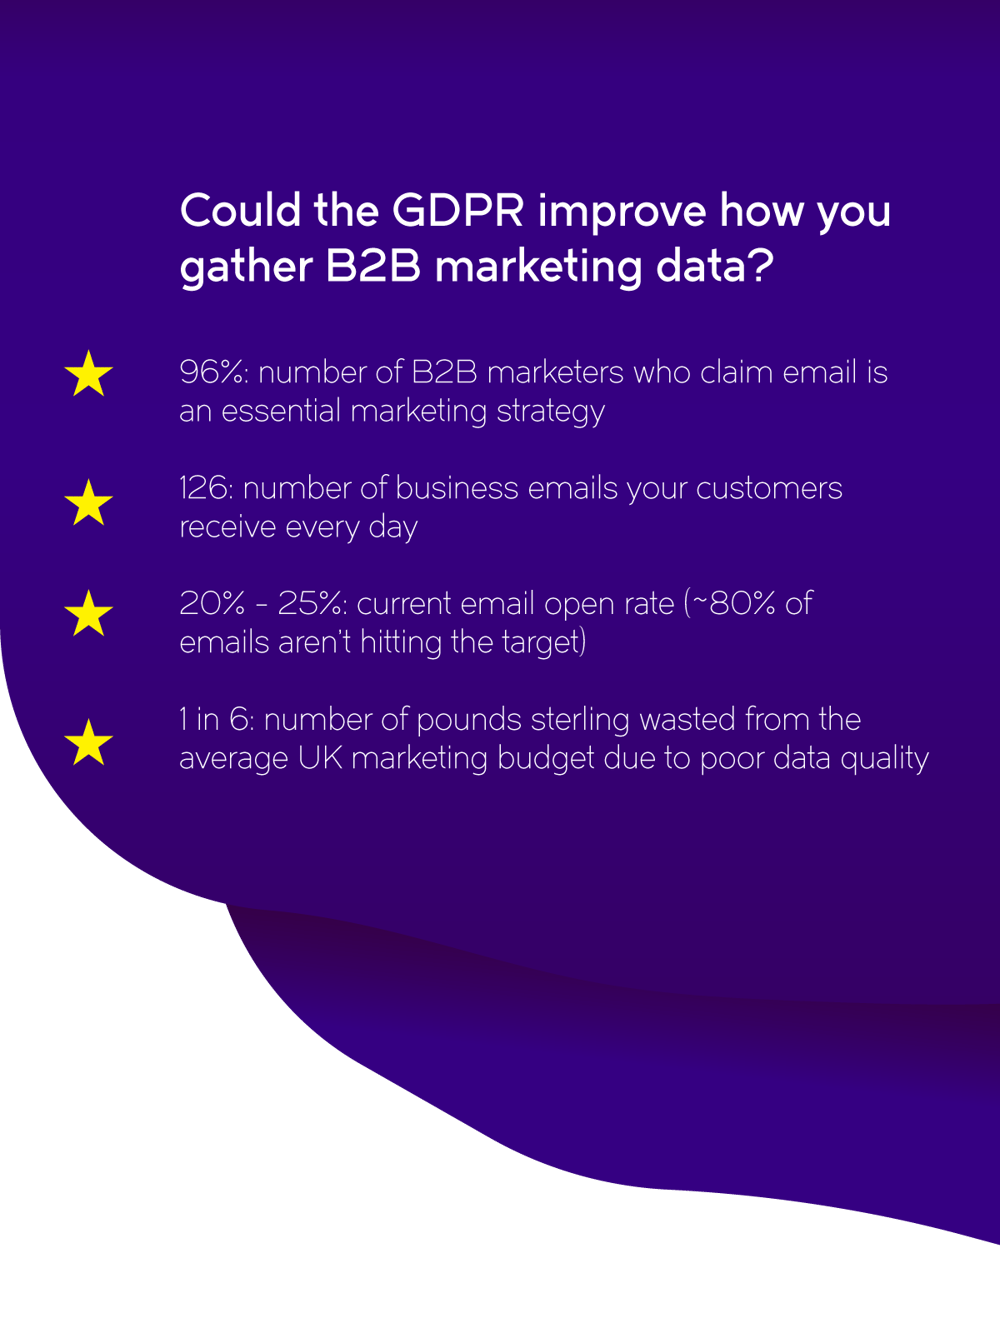 could gdpr improve how you gather b2b marketing data-1